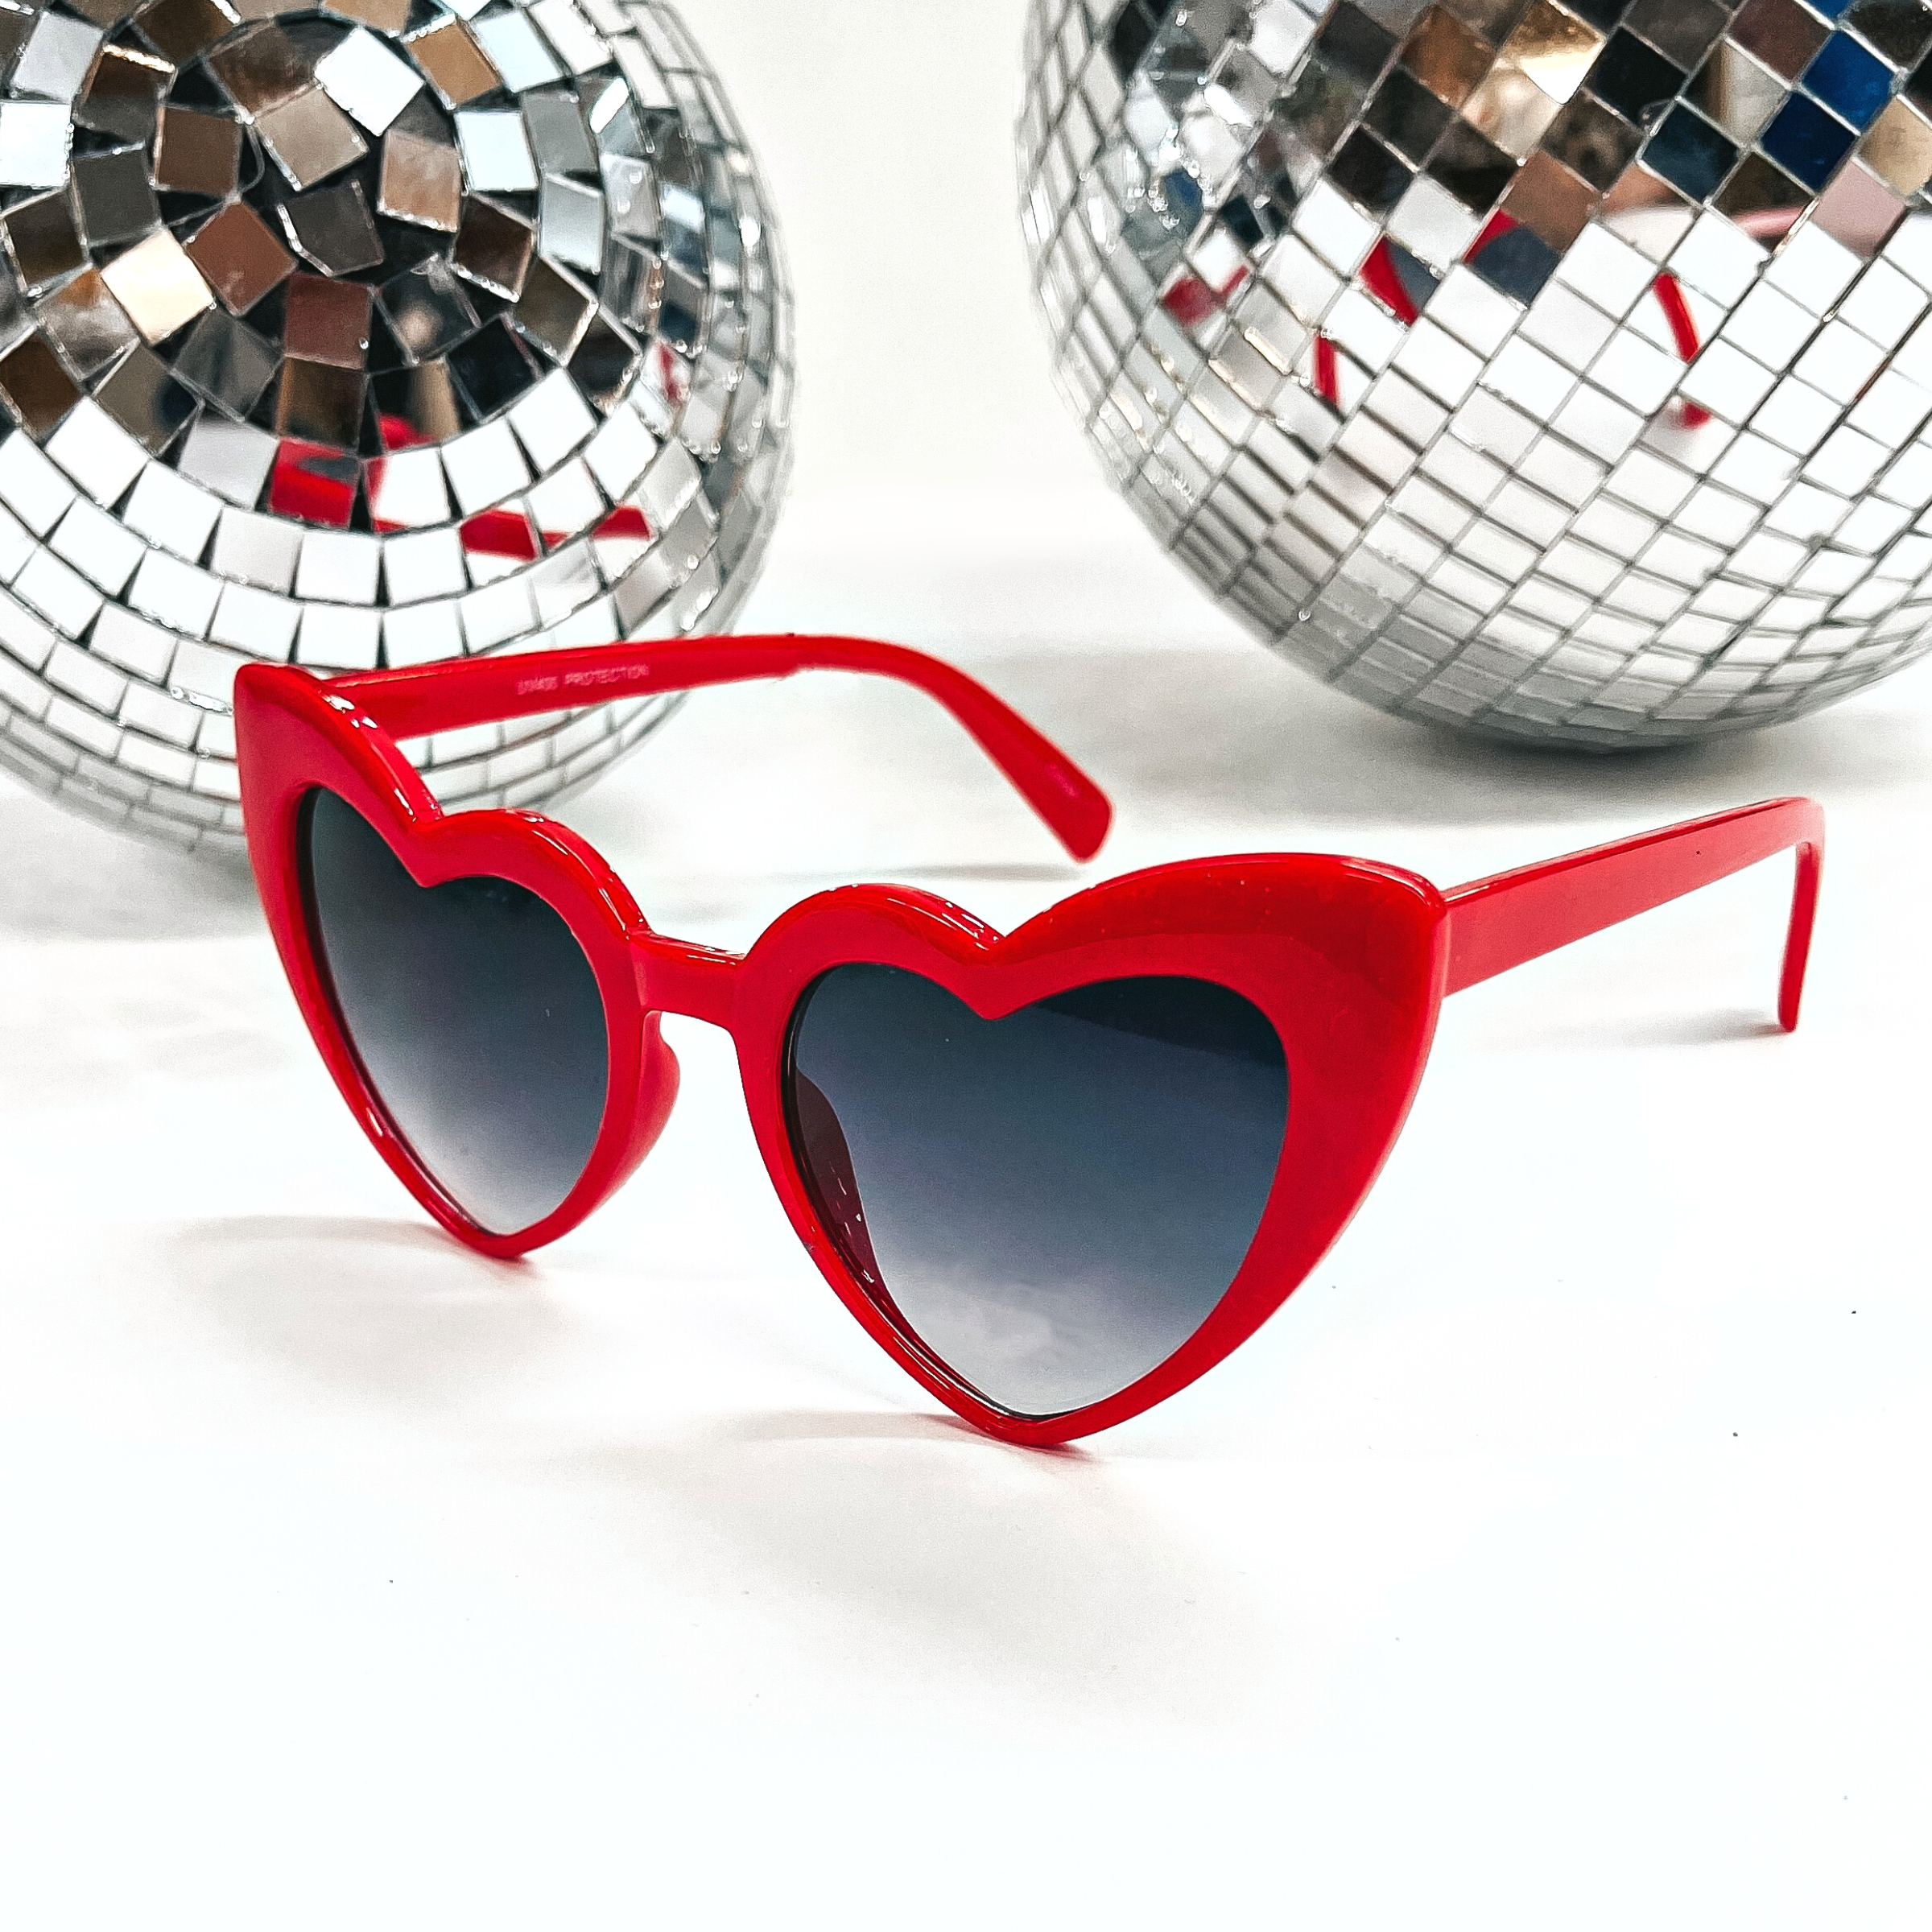 These are heart shaped sunglasses in red with a black/dark grey lenses. These sunglasses are taken on a white background with two silver disco balls in the back as decor.